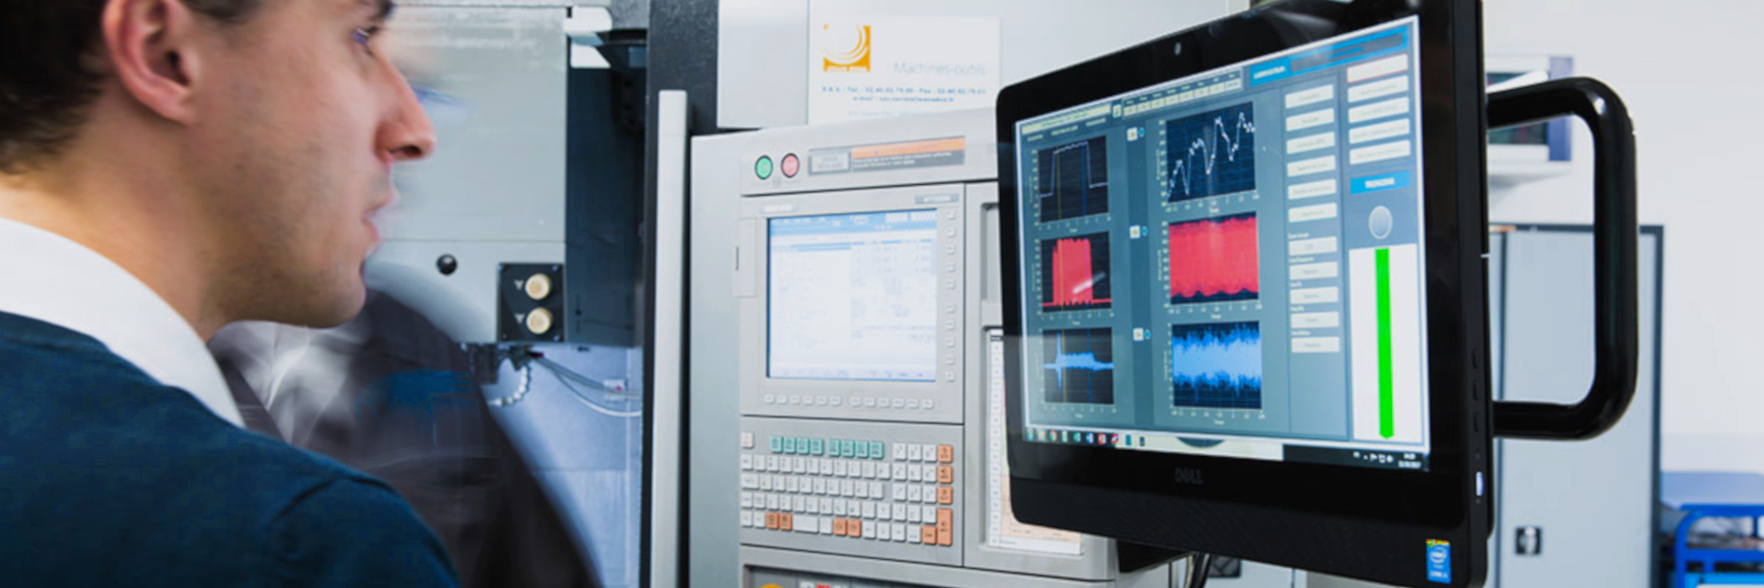 machining monitoring on the MITISlab with the Witis acquisition and analysis software